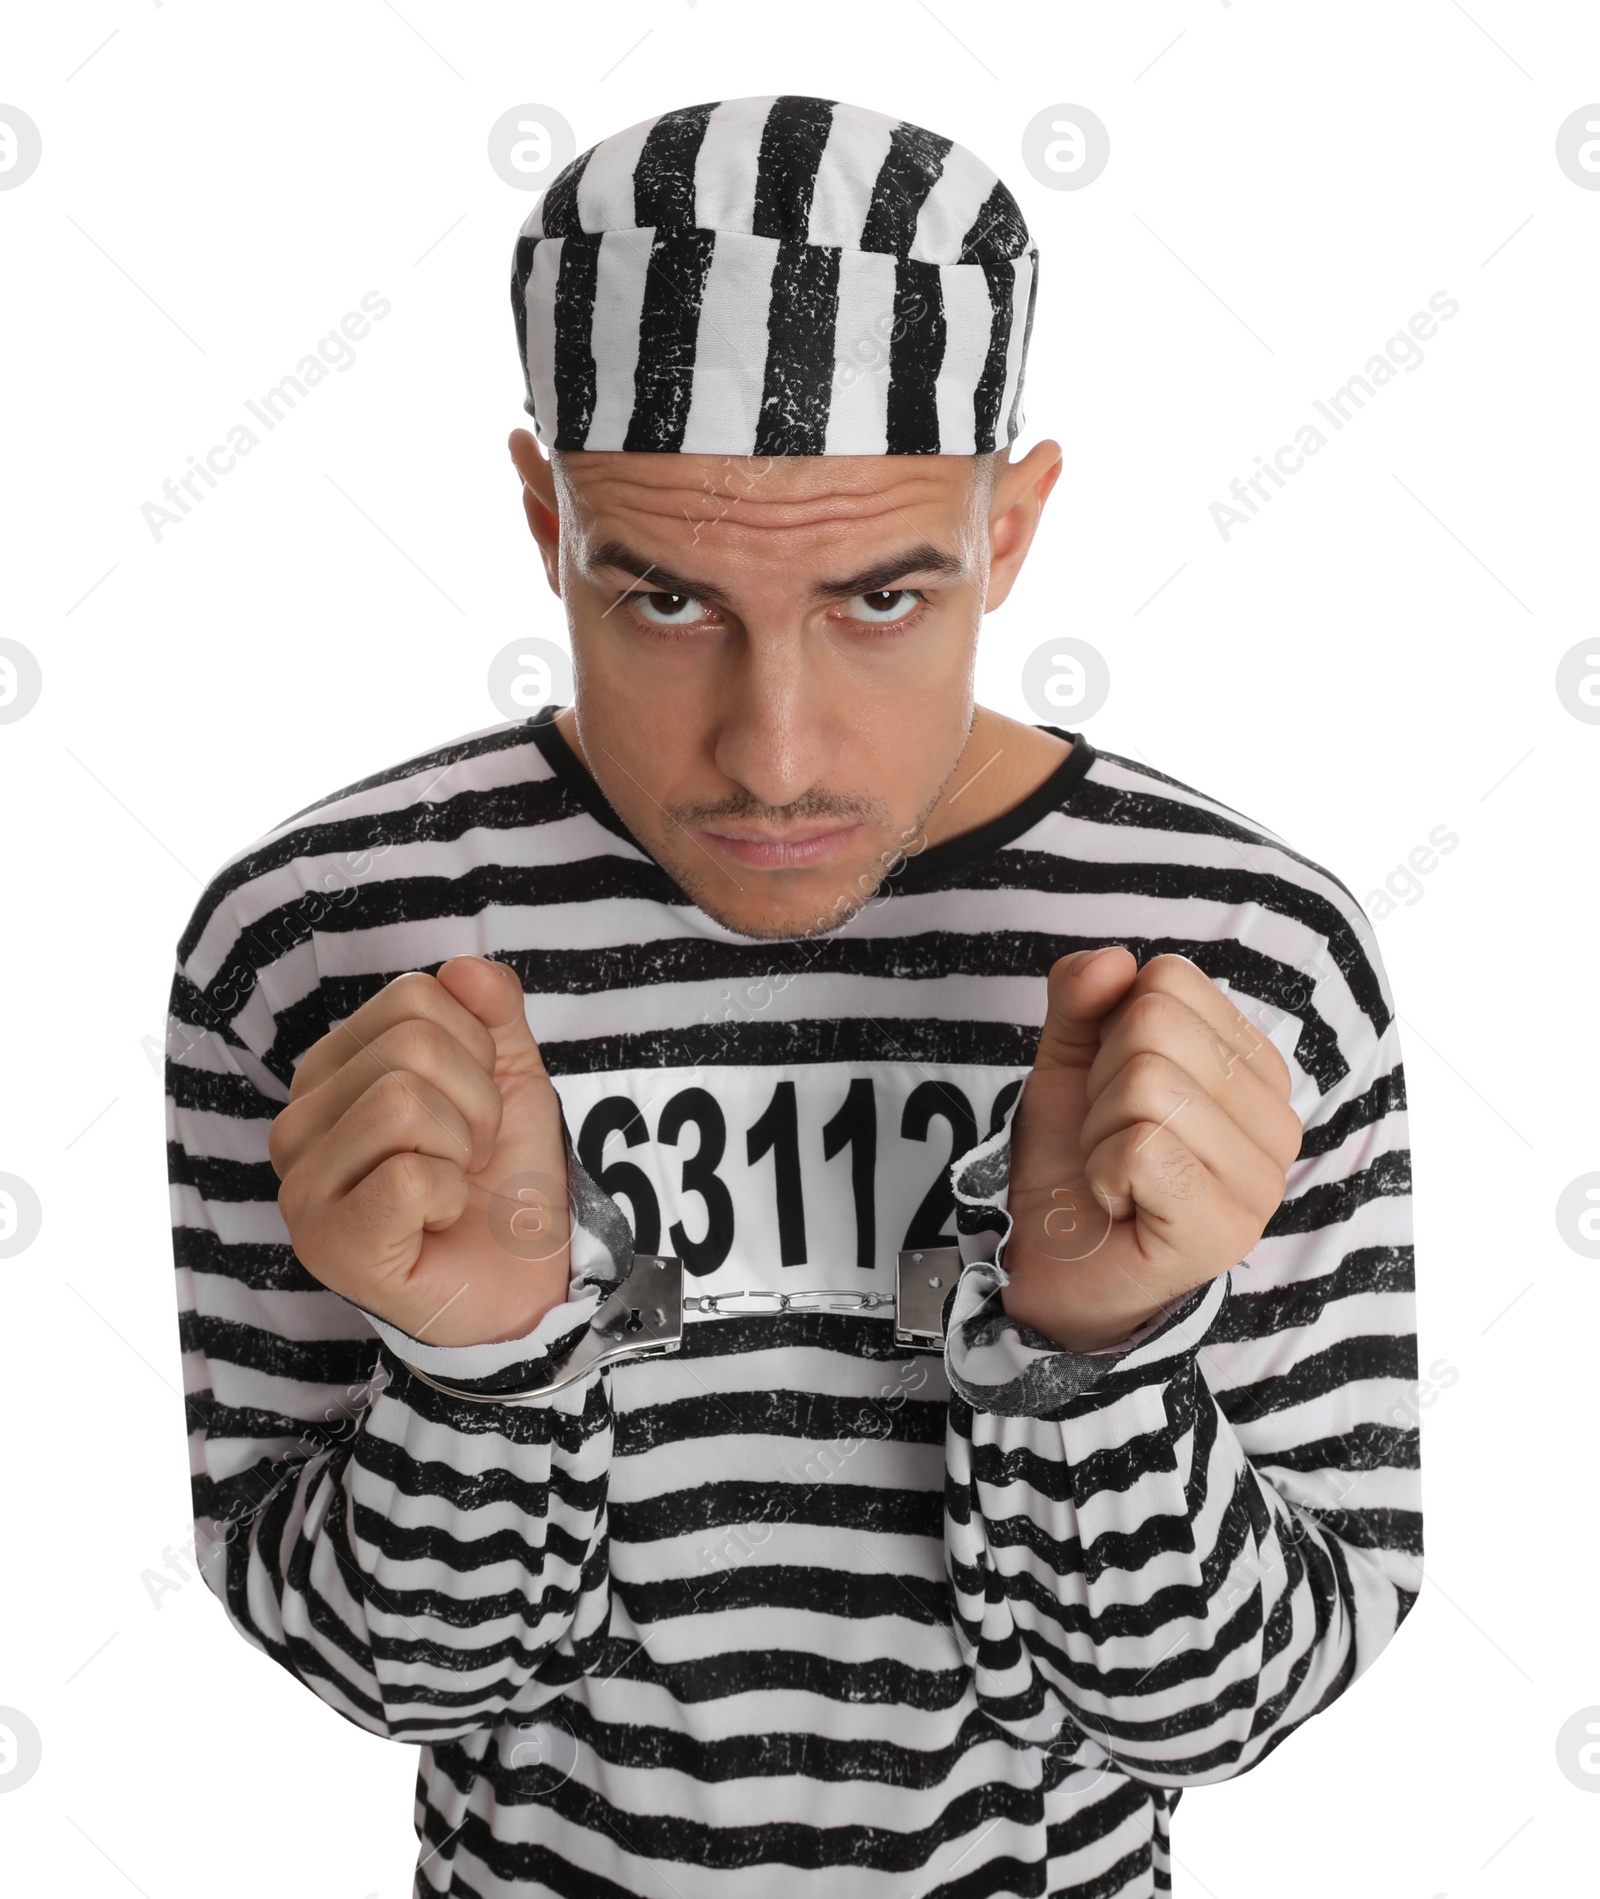 Photo of Prisoner in striped uniform with handcuffs on white background